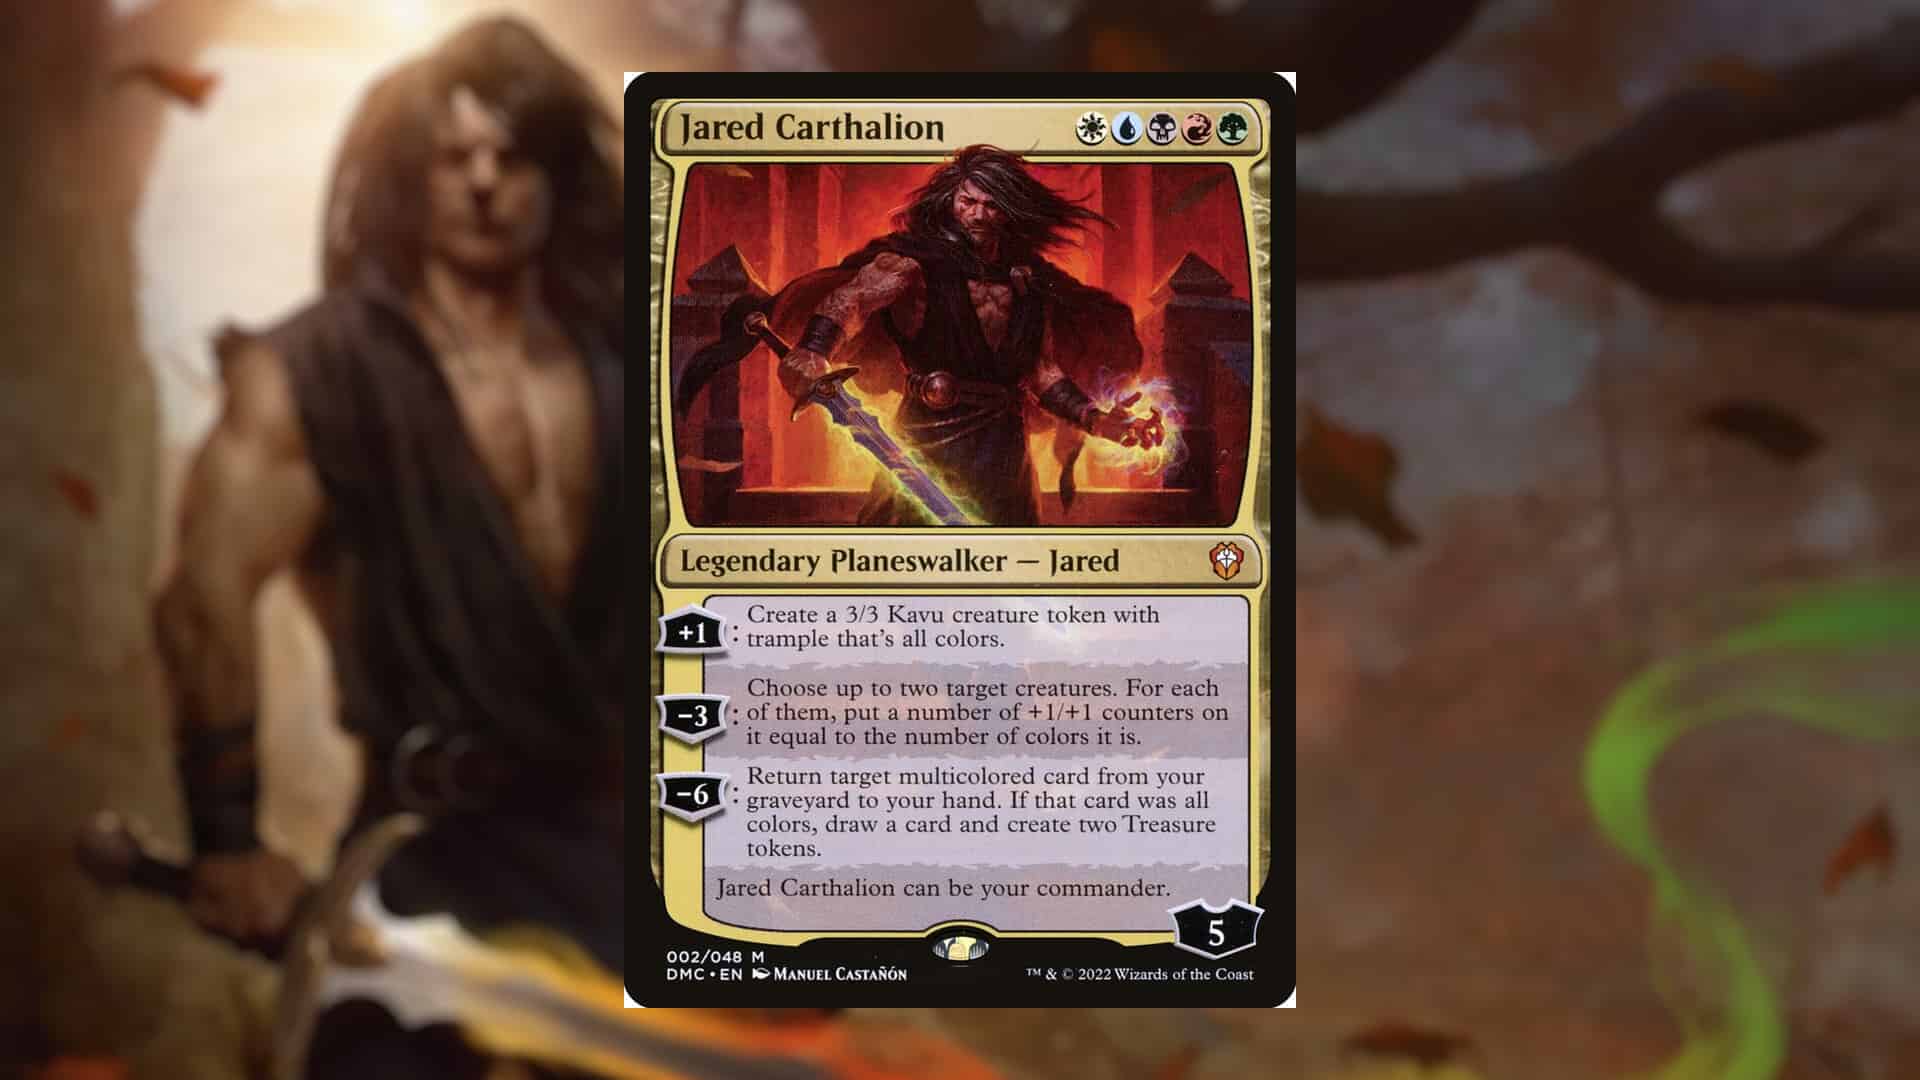 Picture of Jared, Carthalion card